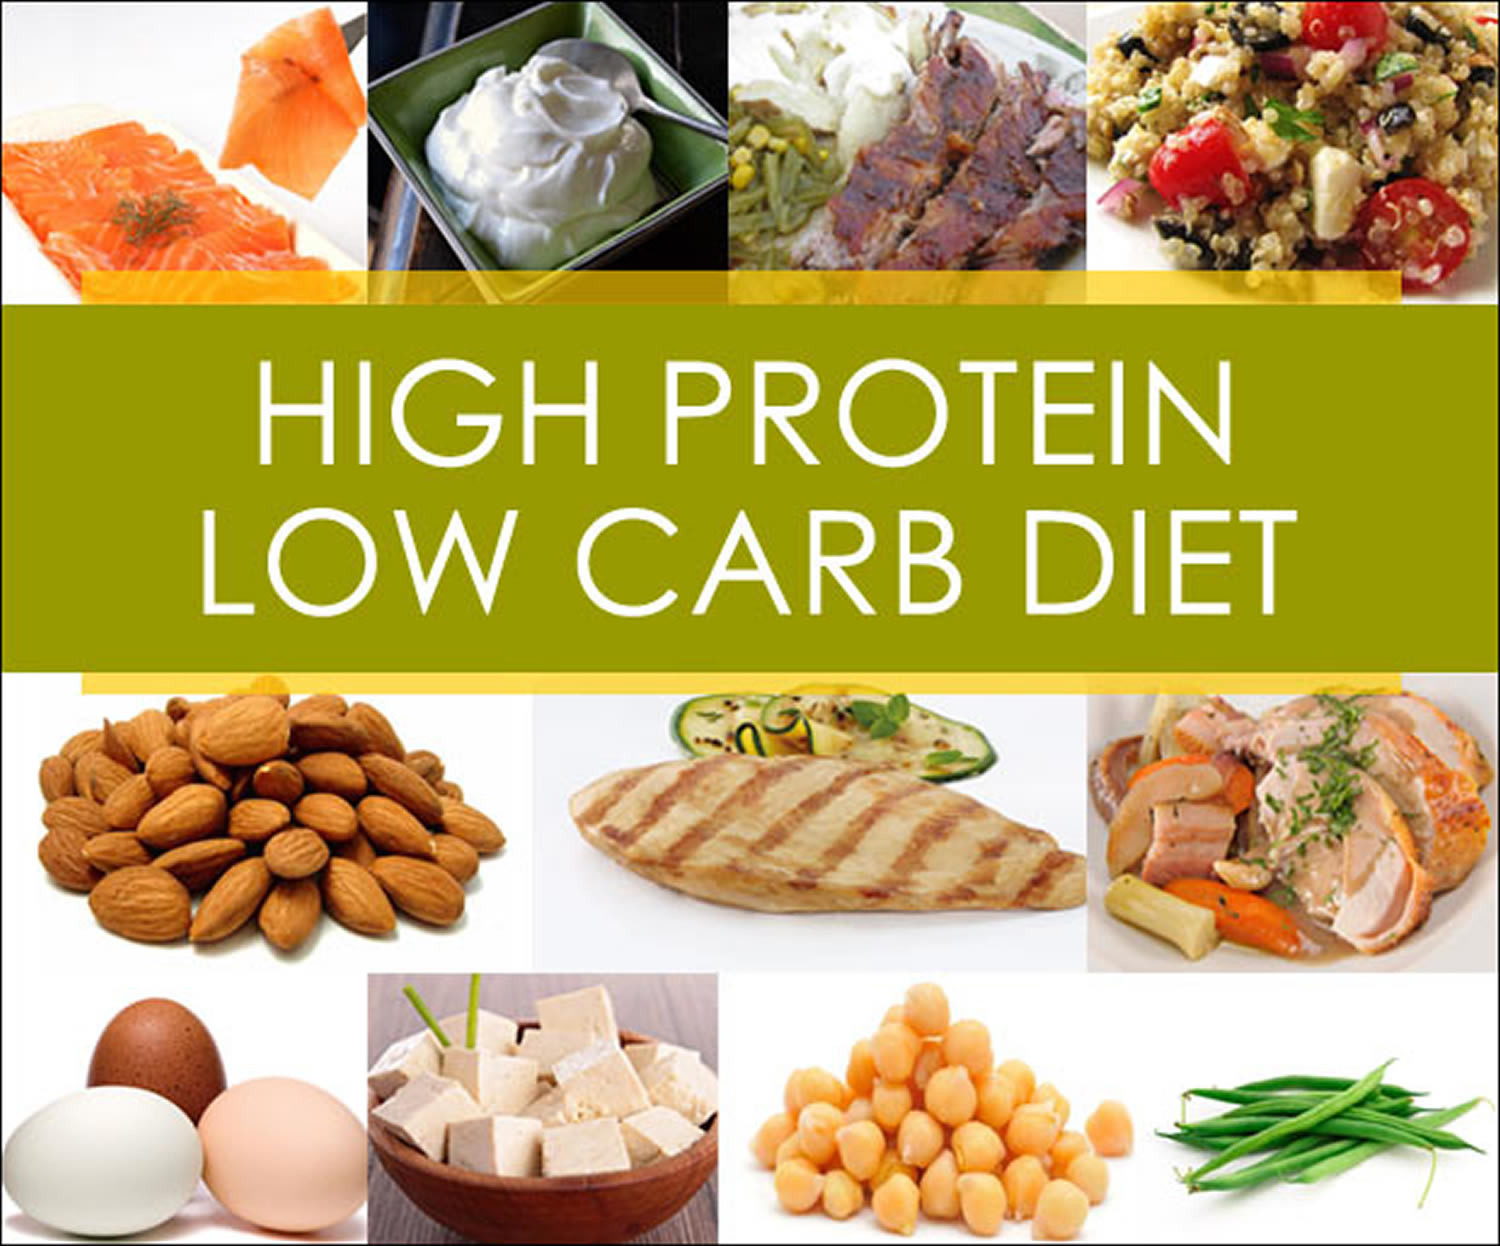 High Protein Low Carbohydrate Diet
 High Protein Low Carb Diet for Weight Loss What Are The